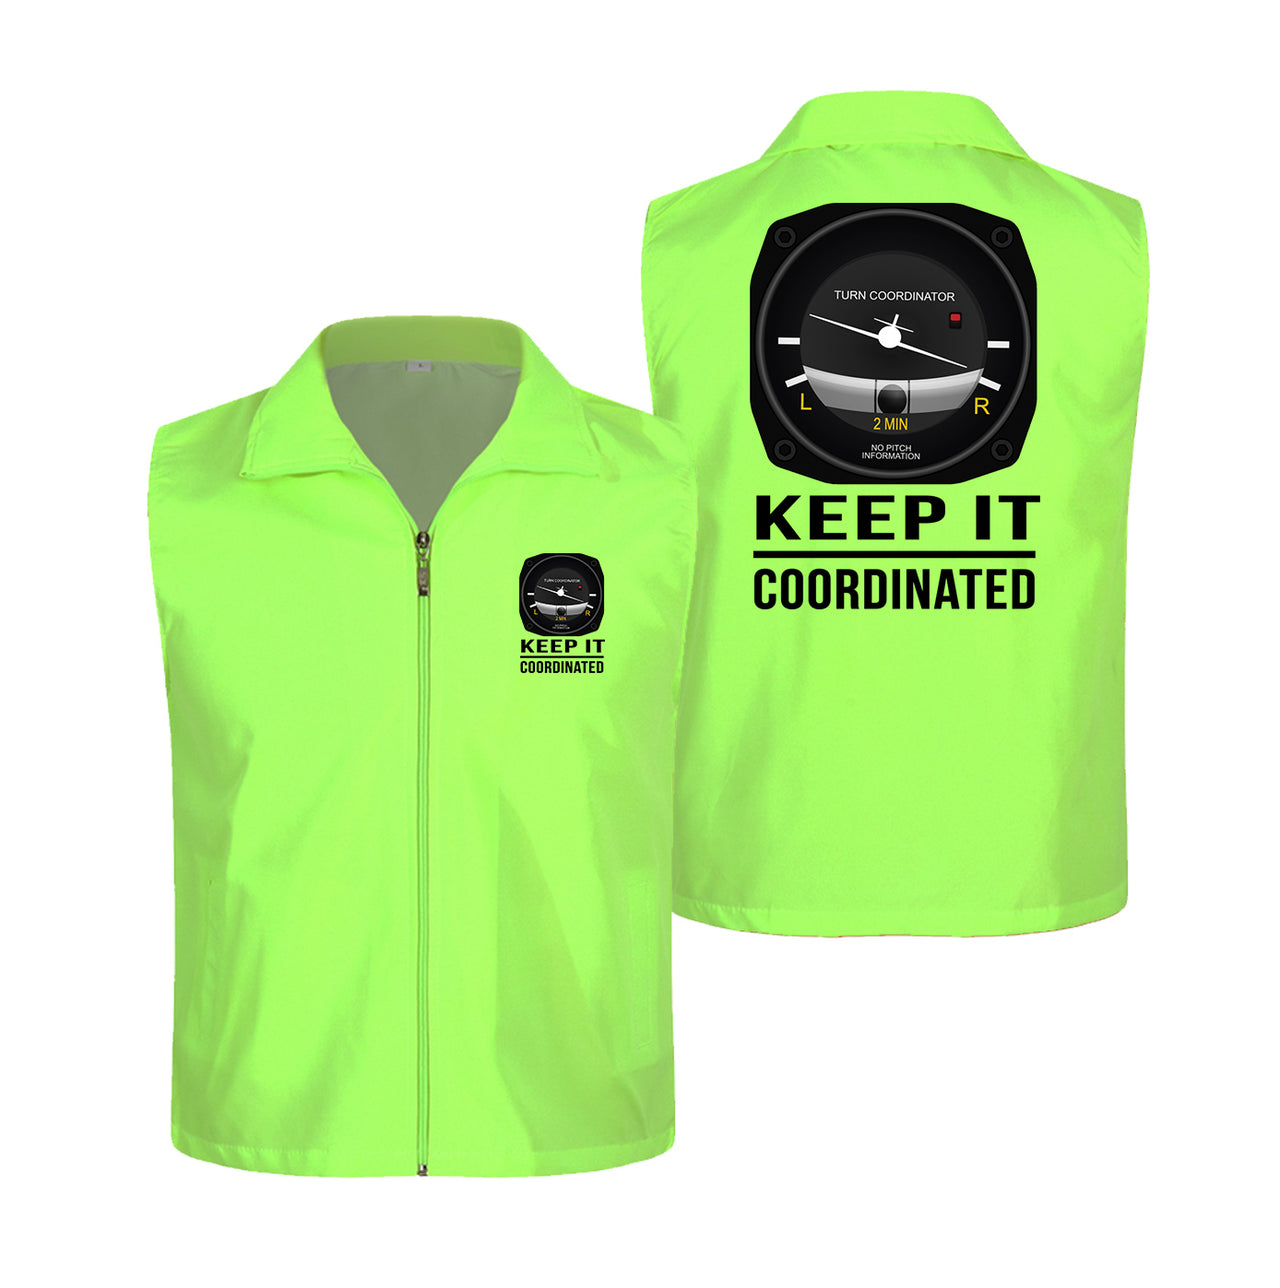 Keep It Coordinated Designed Thin Style Vests